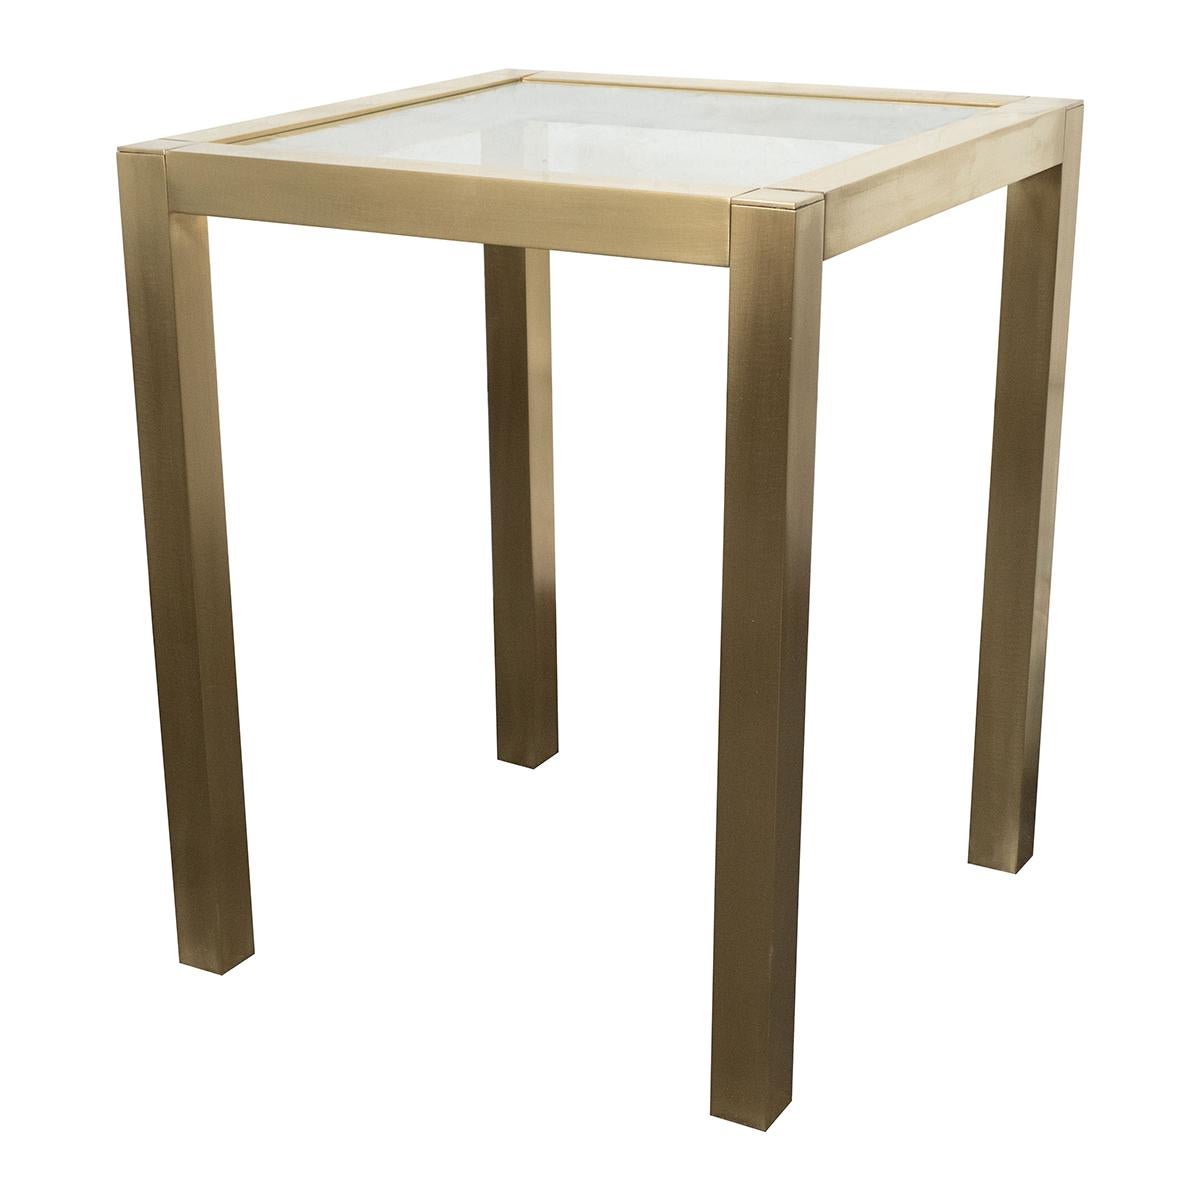 Single satin finish brass side table with inset glass top.